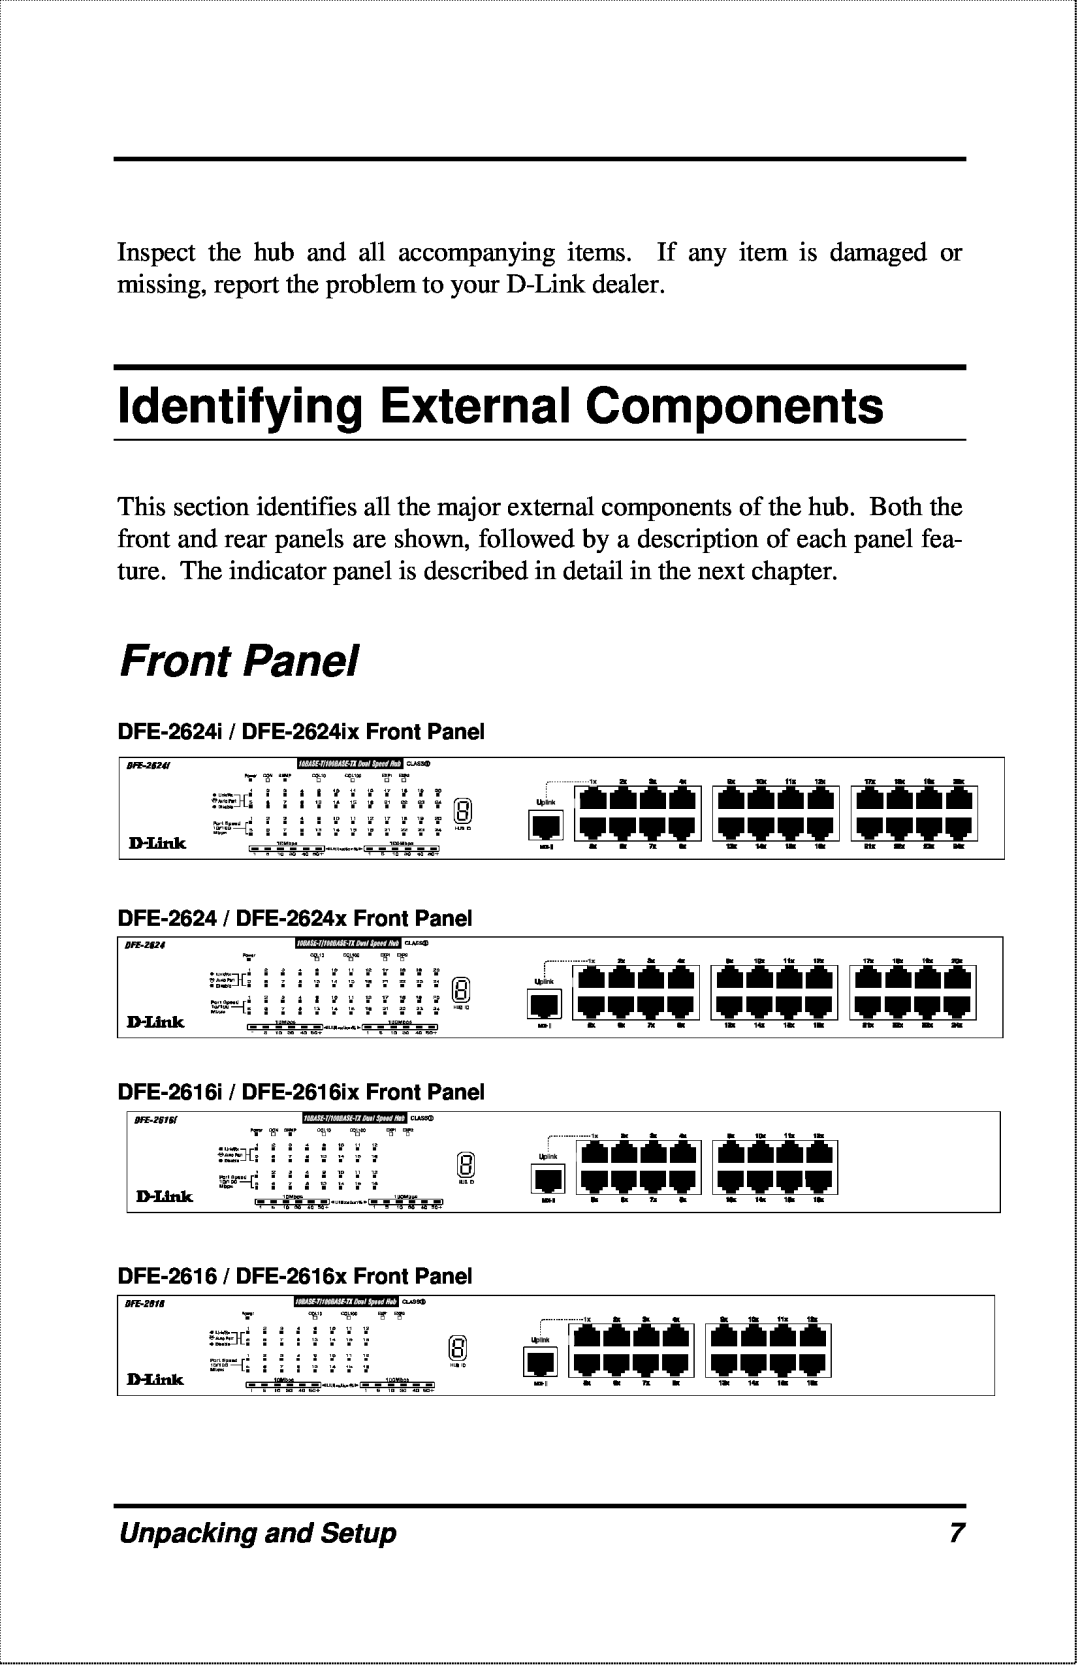 D-Link DFE-2600 manual Identifying External Components, Front Panel, Unpacking and Setup 